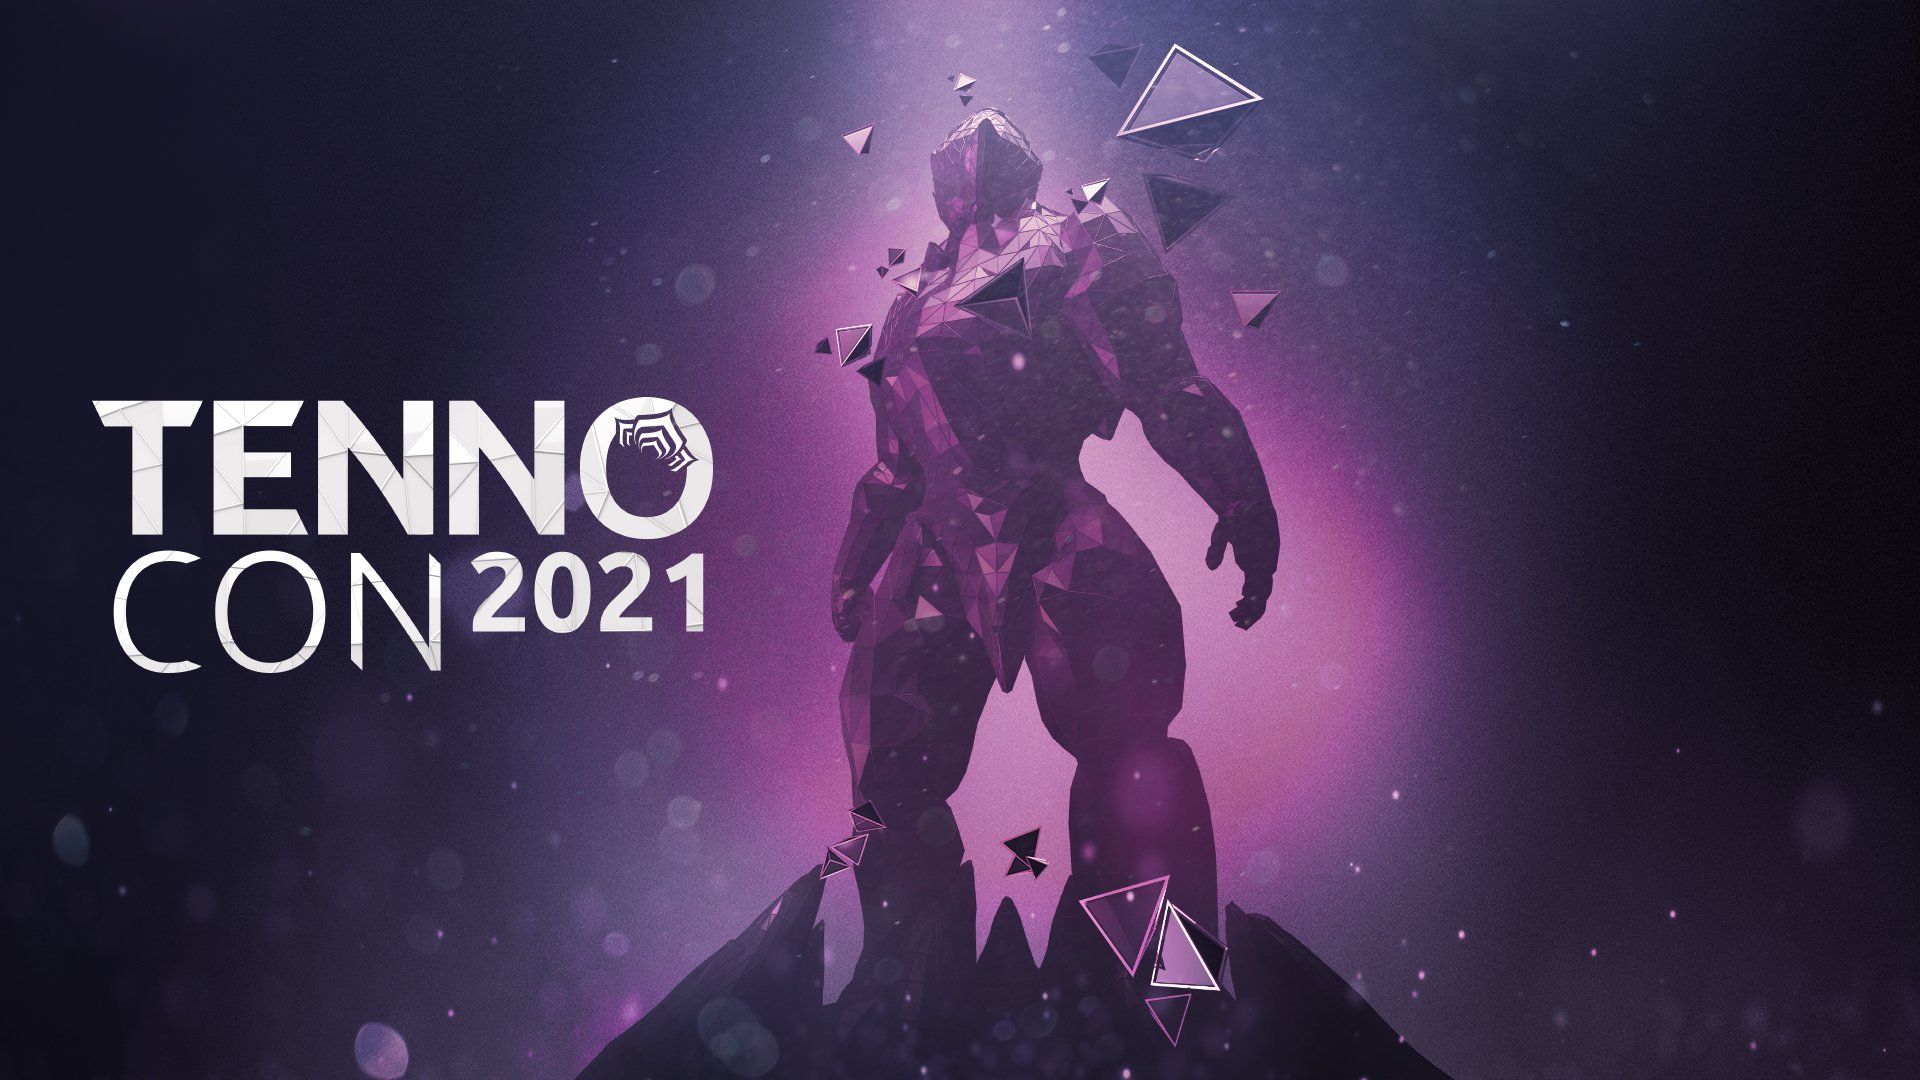 How To Claim TennoCon 2021 Twitch Drops And Link Warframe Account